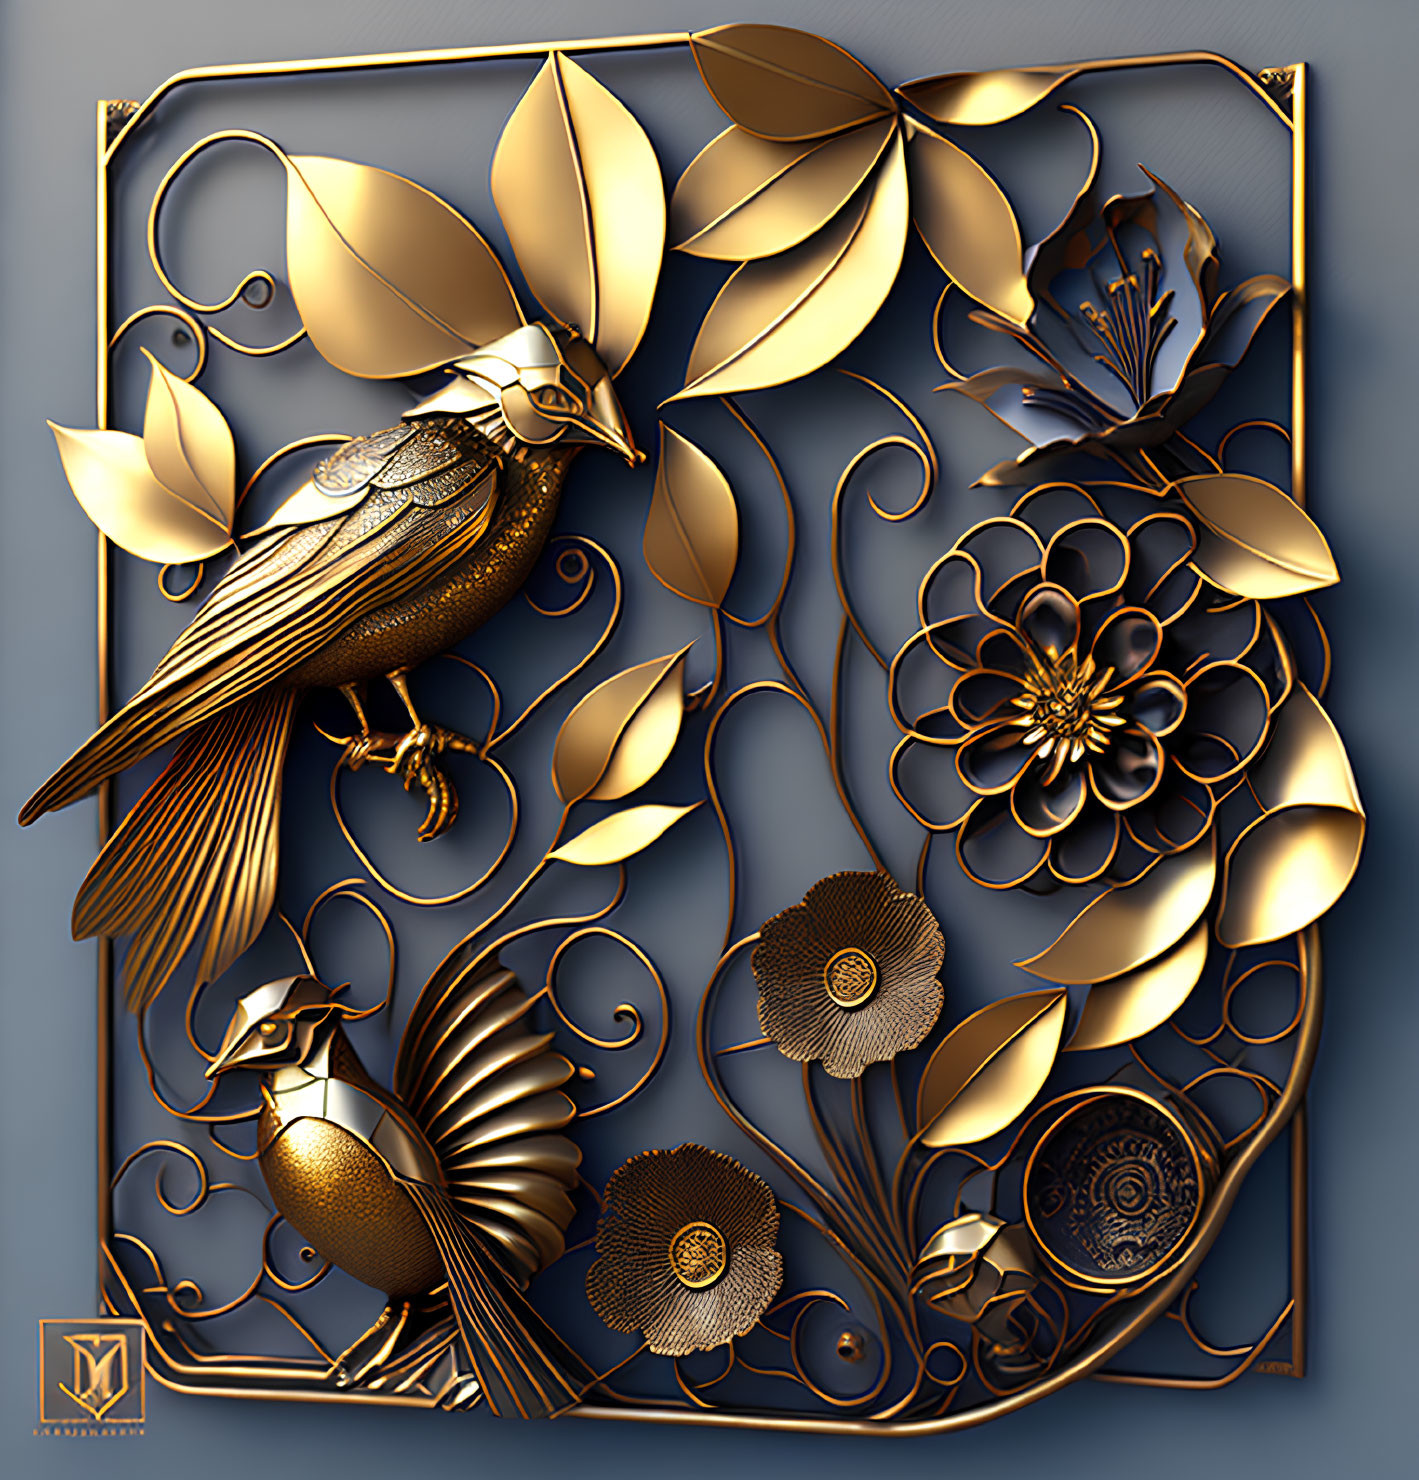 Golden 3D Bird Artwork with Leaves and Flowers in Square Frame